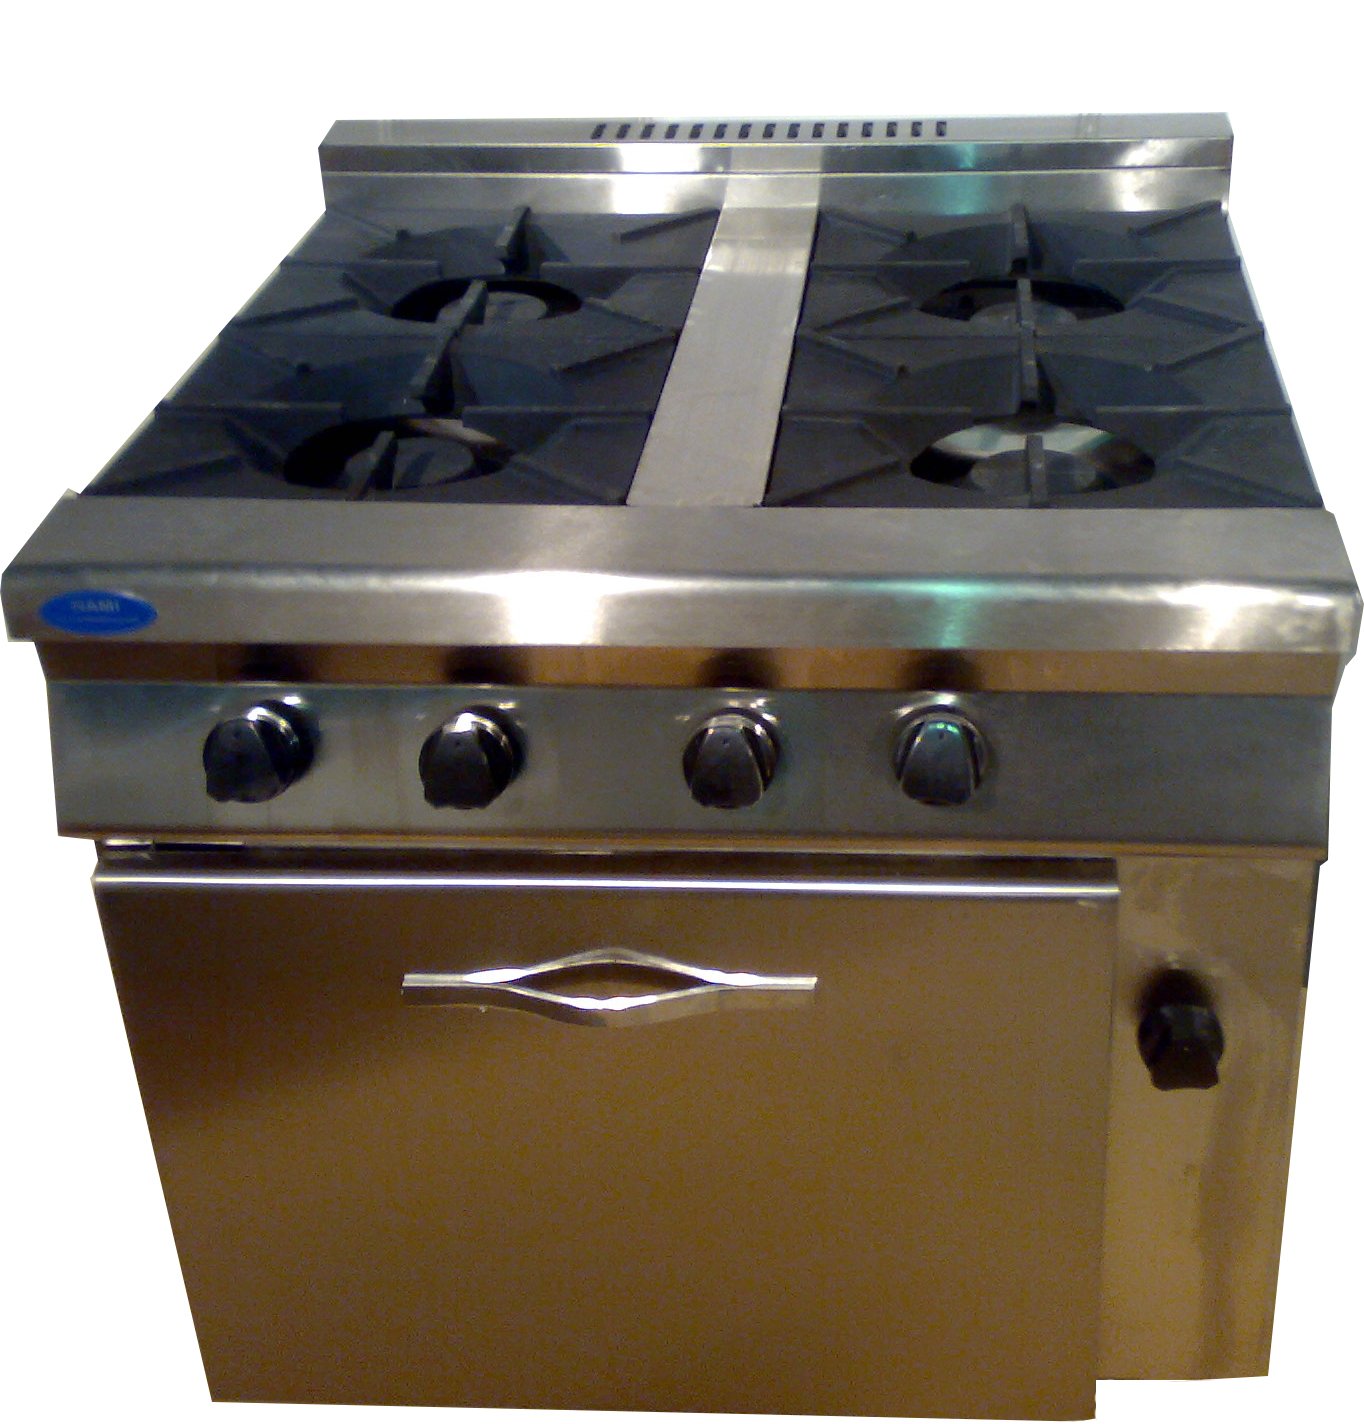 4 flame oven oven